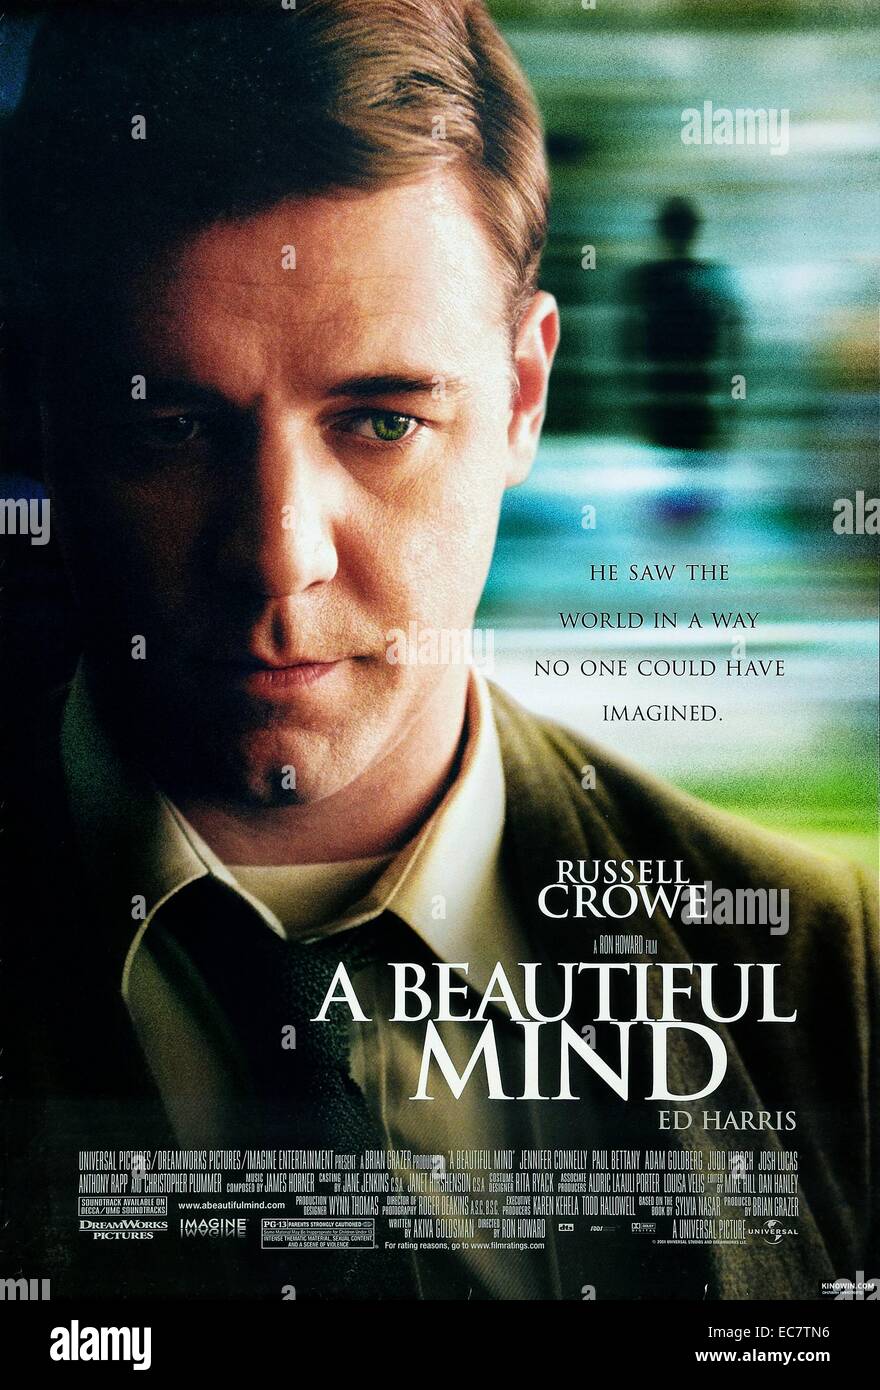 A Beautiful Mind is a 2001 American biographical drama film based on the life of John Nash, a Nobel Laureate in Economics. The film was directed by Ron Howard and was inspired by a bestselling, Pulitzer Prize-nominated 1998 book of the same name by Sylvia Nasar. The film stars Russell Crowe, along with Ed Harris and Jennifer Connelly. Stock Photo